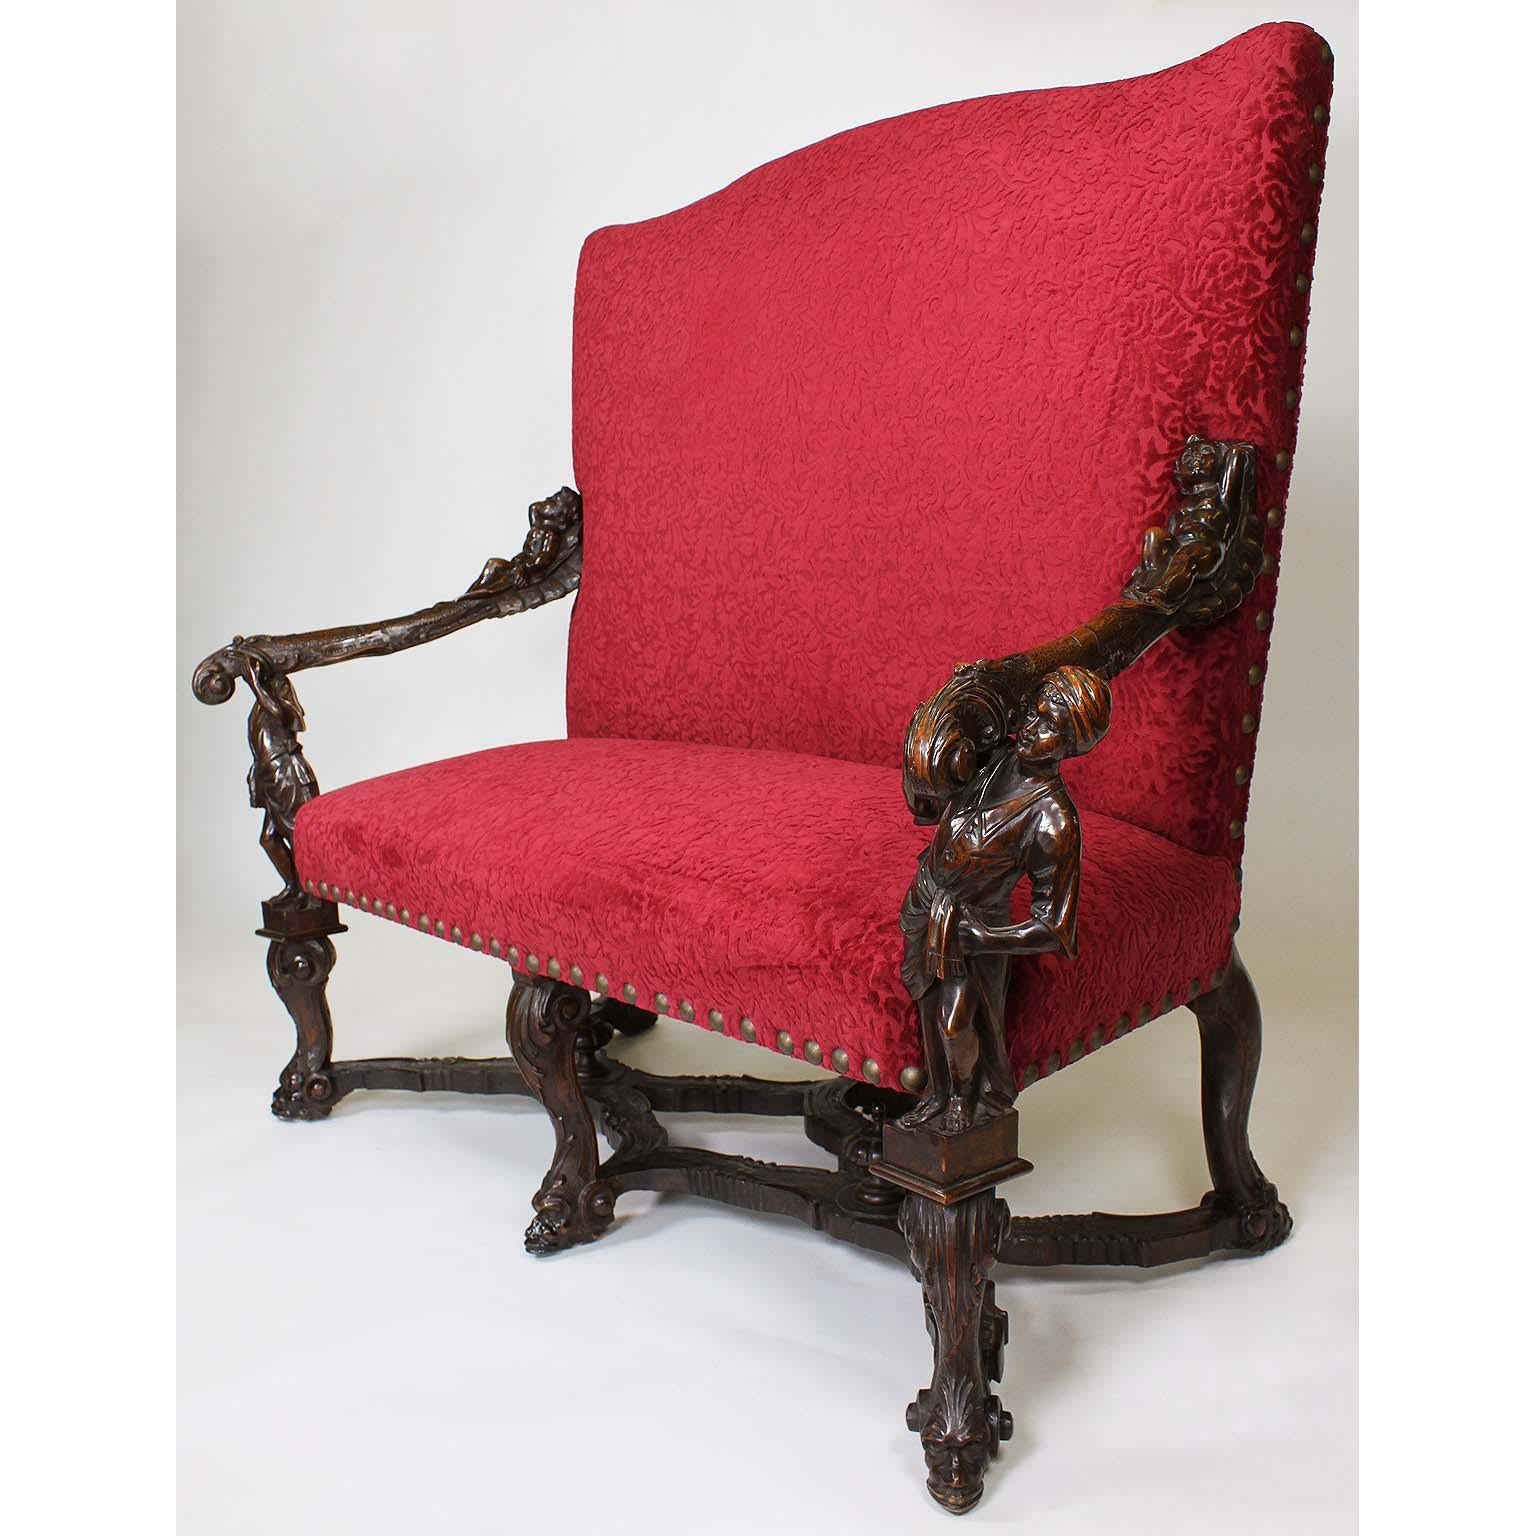 A fine and rare Italian 19th century Baroque style carved walnut figural settee (Sofa-Loveseat), attributed to Valentino Panciera Besarel (Venice, 1829-1902) in the manner of Andrea Brustolon (1662-1732). The ornately carved frame flanked on each